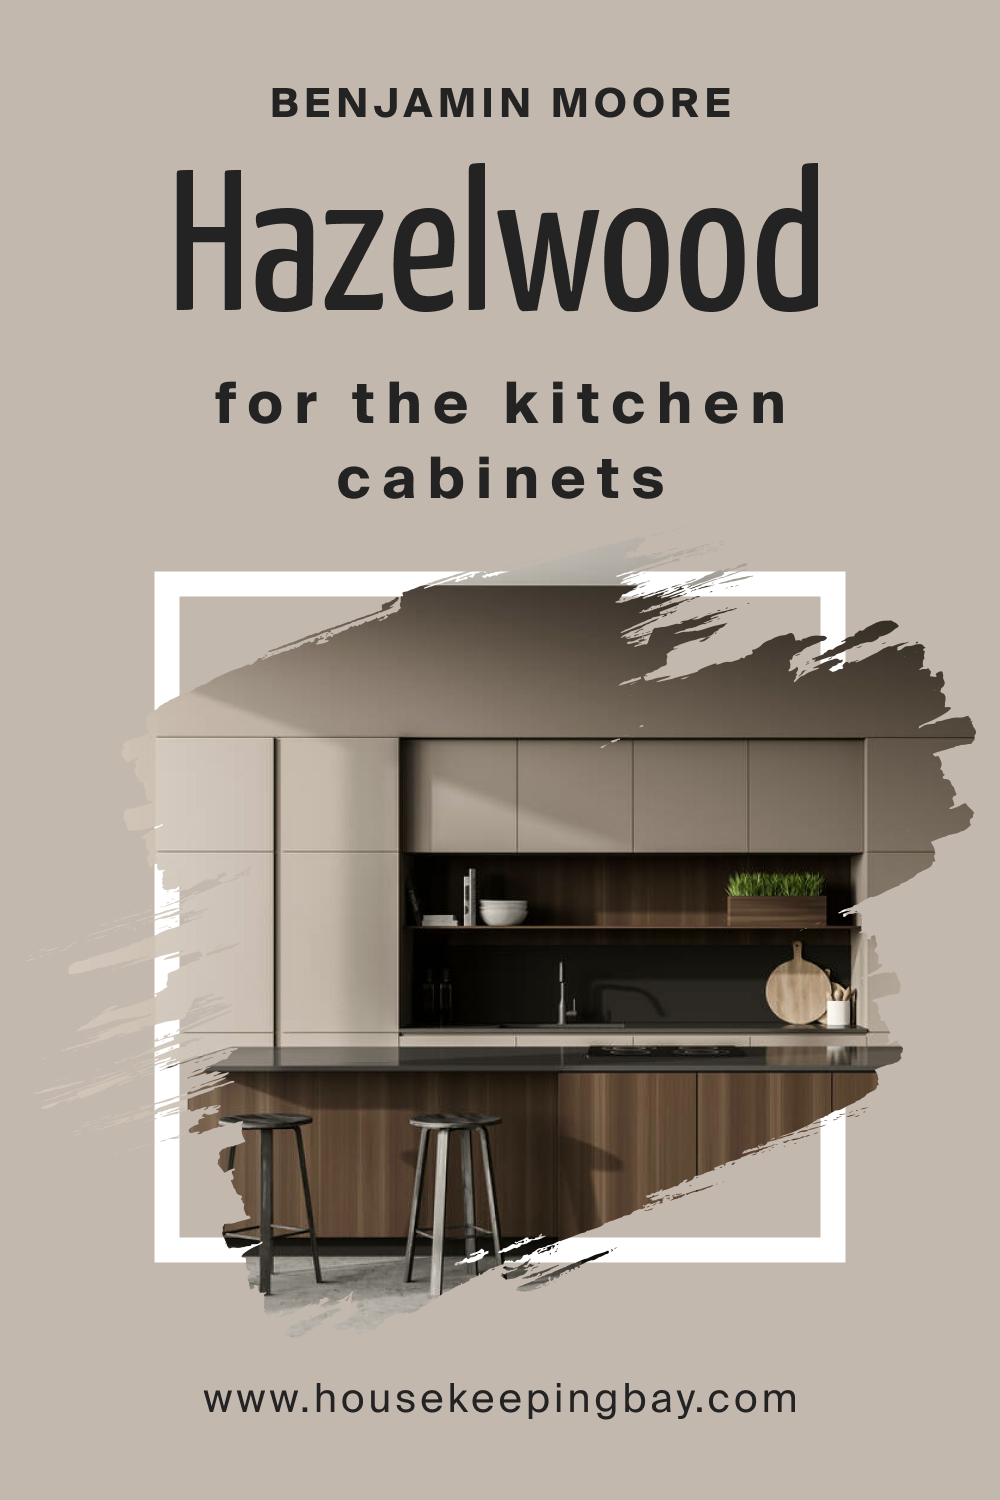 Benjamin Moore. BM Hazelwood 1005 for the Kitchen Cabinets